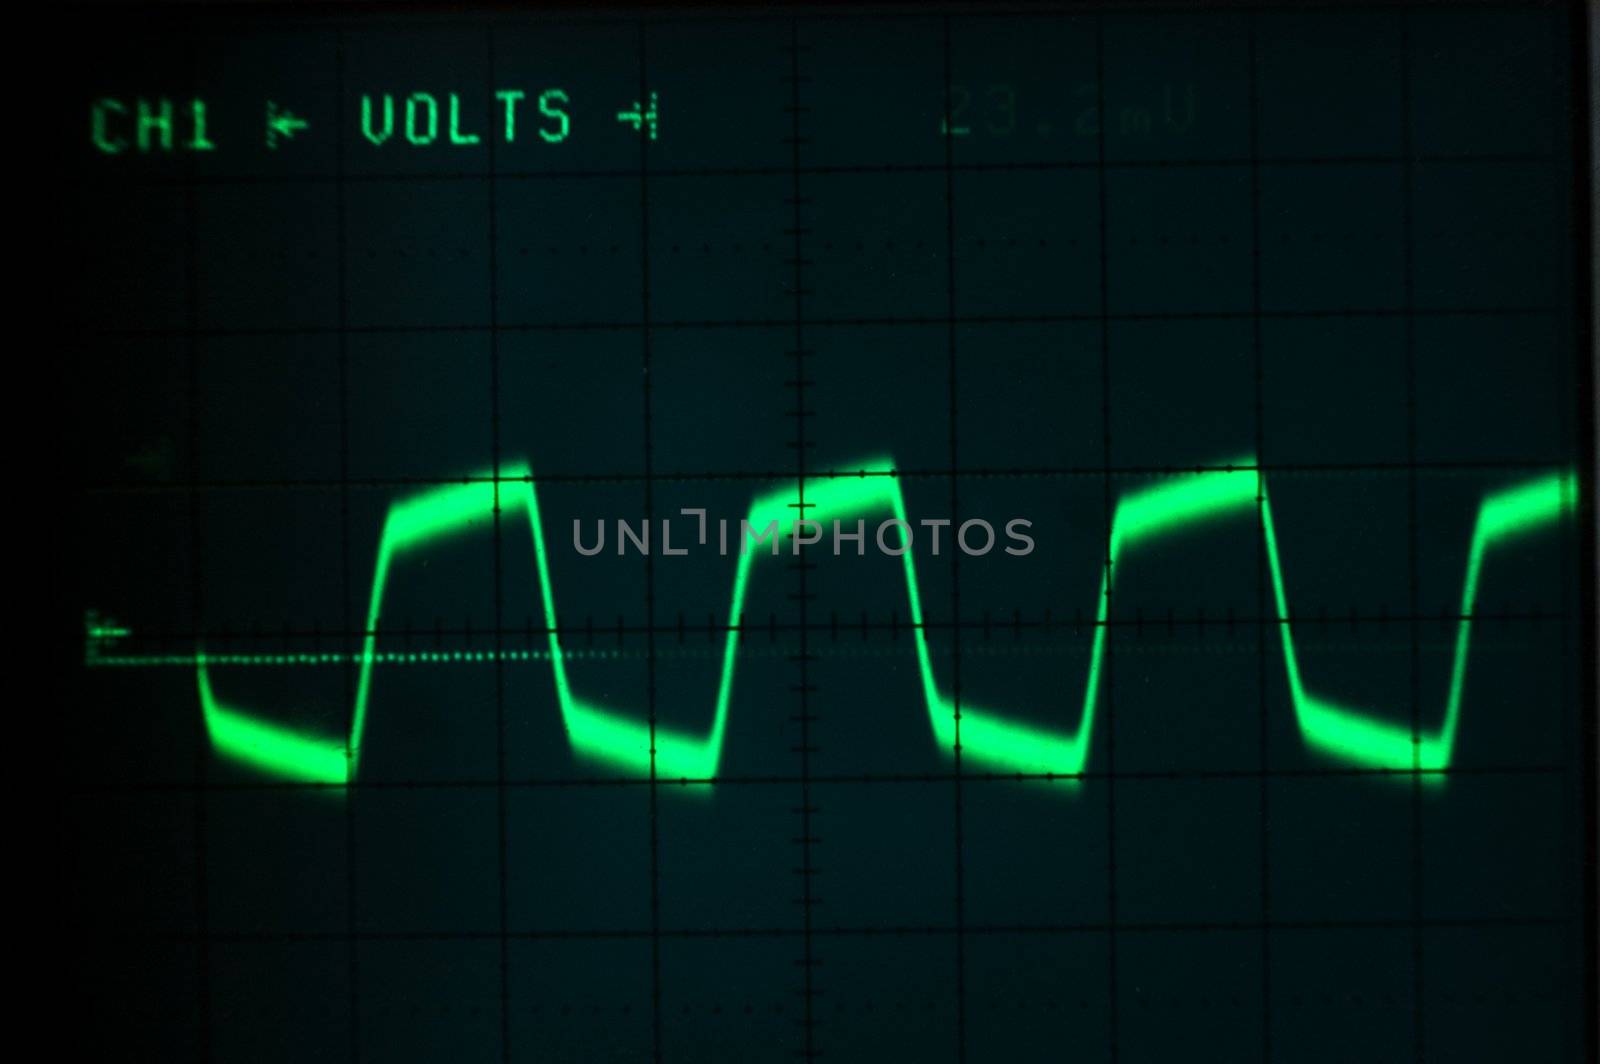 square wave illustrated on an oscilloscope